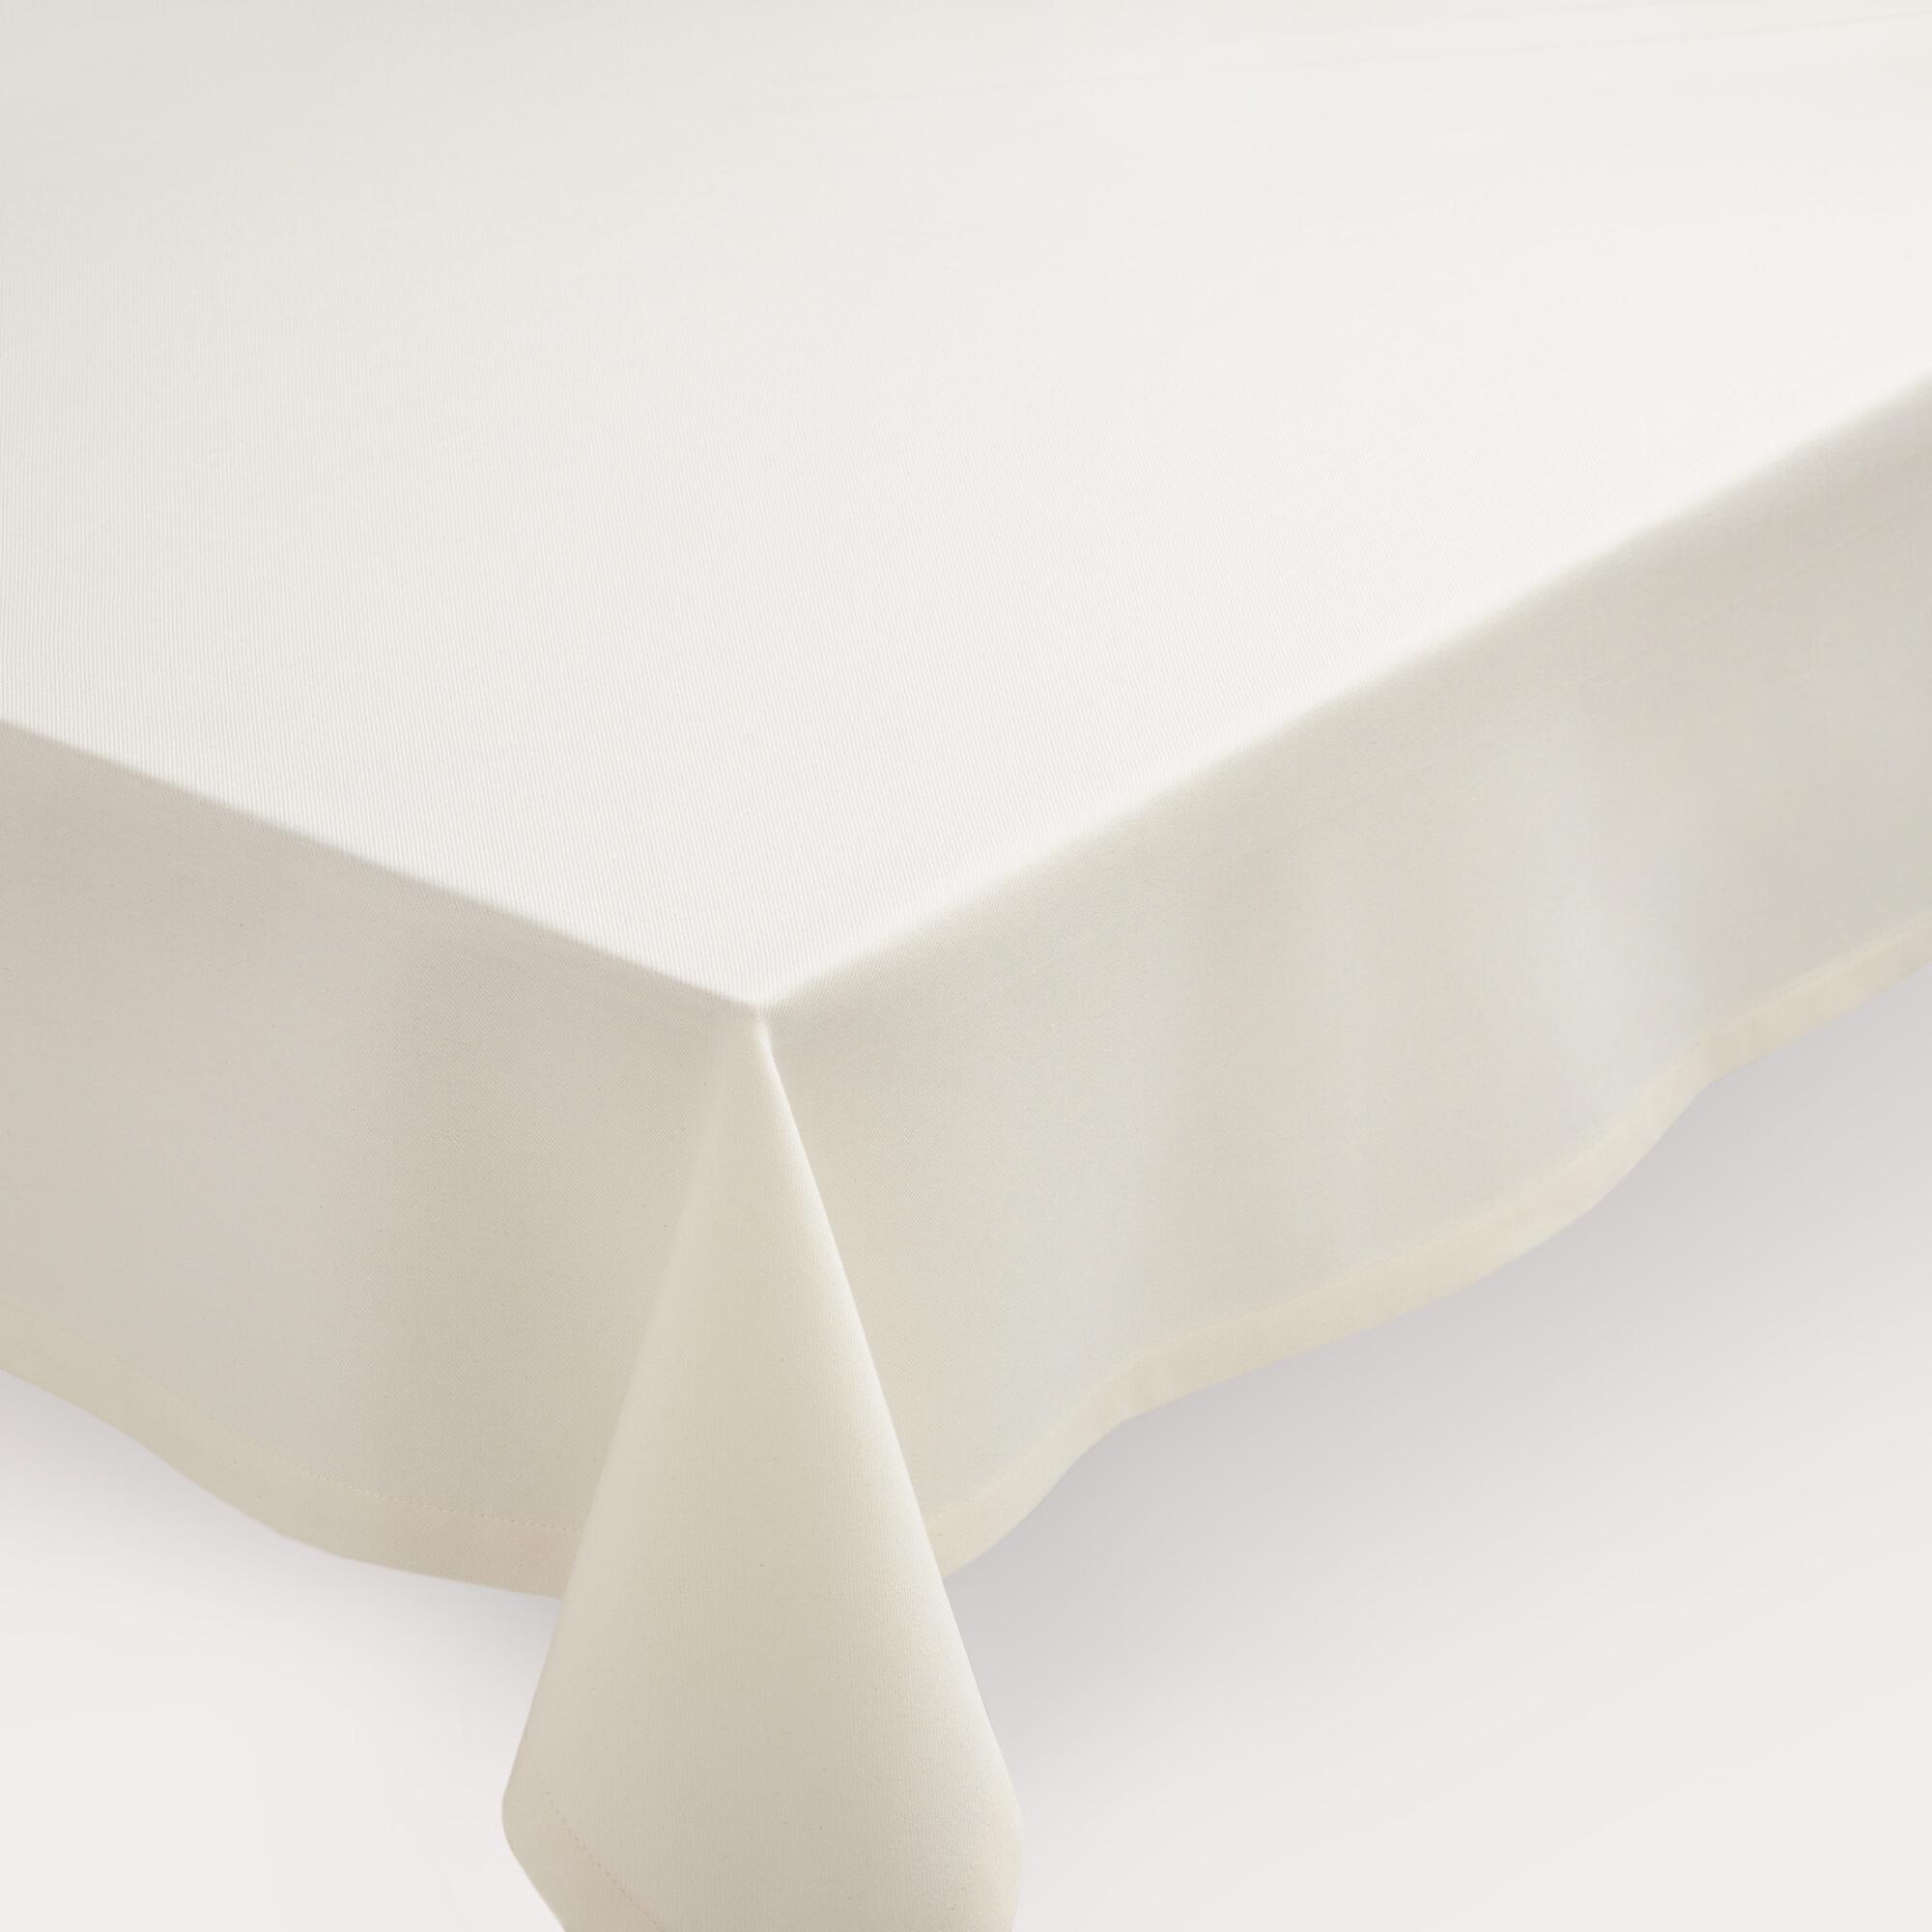 Ivory Buffet Tablecloth: White - Cotton - 60" x 120" by World Market